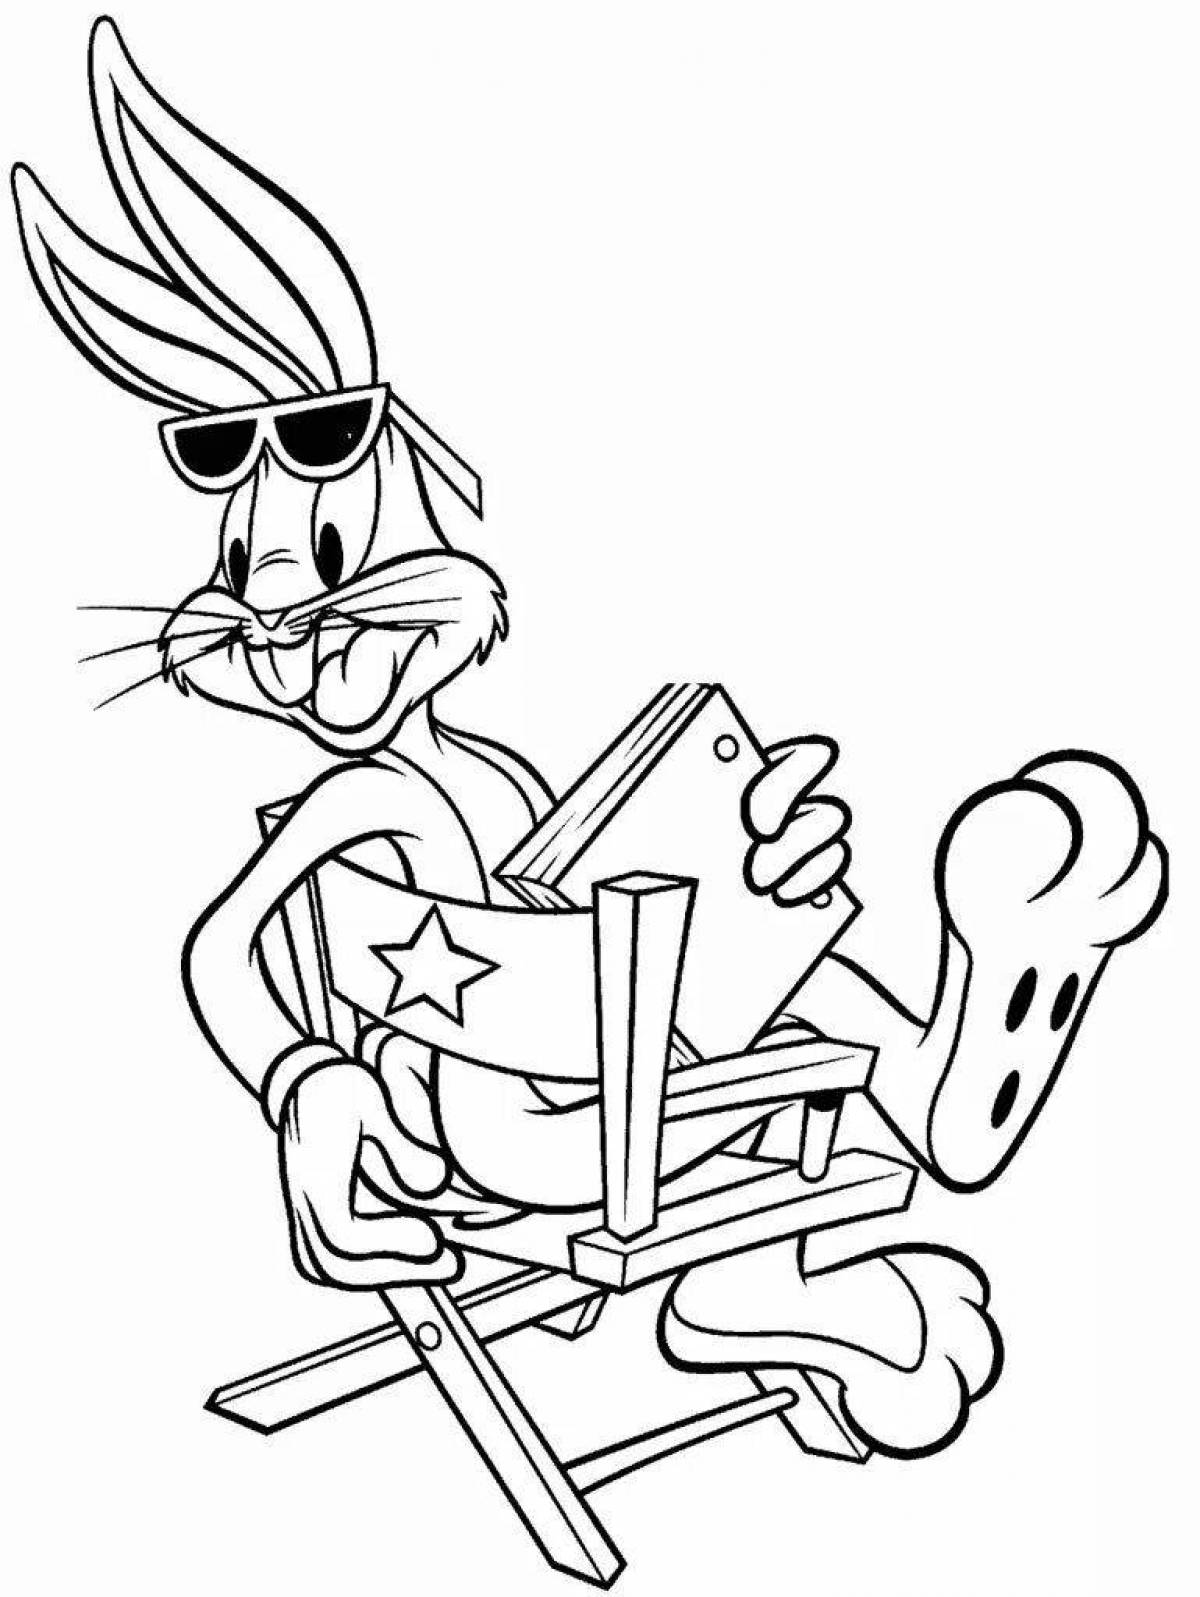 Colorful bugs bunny coloring page